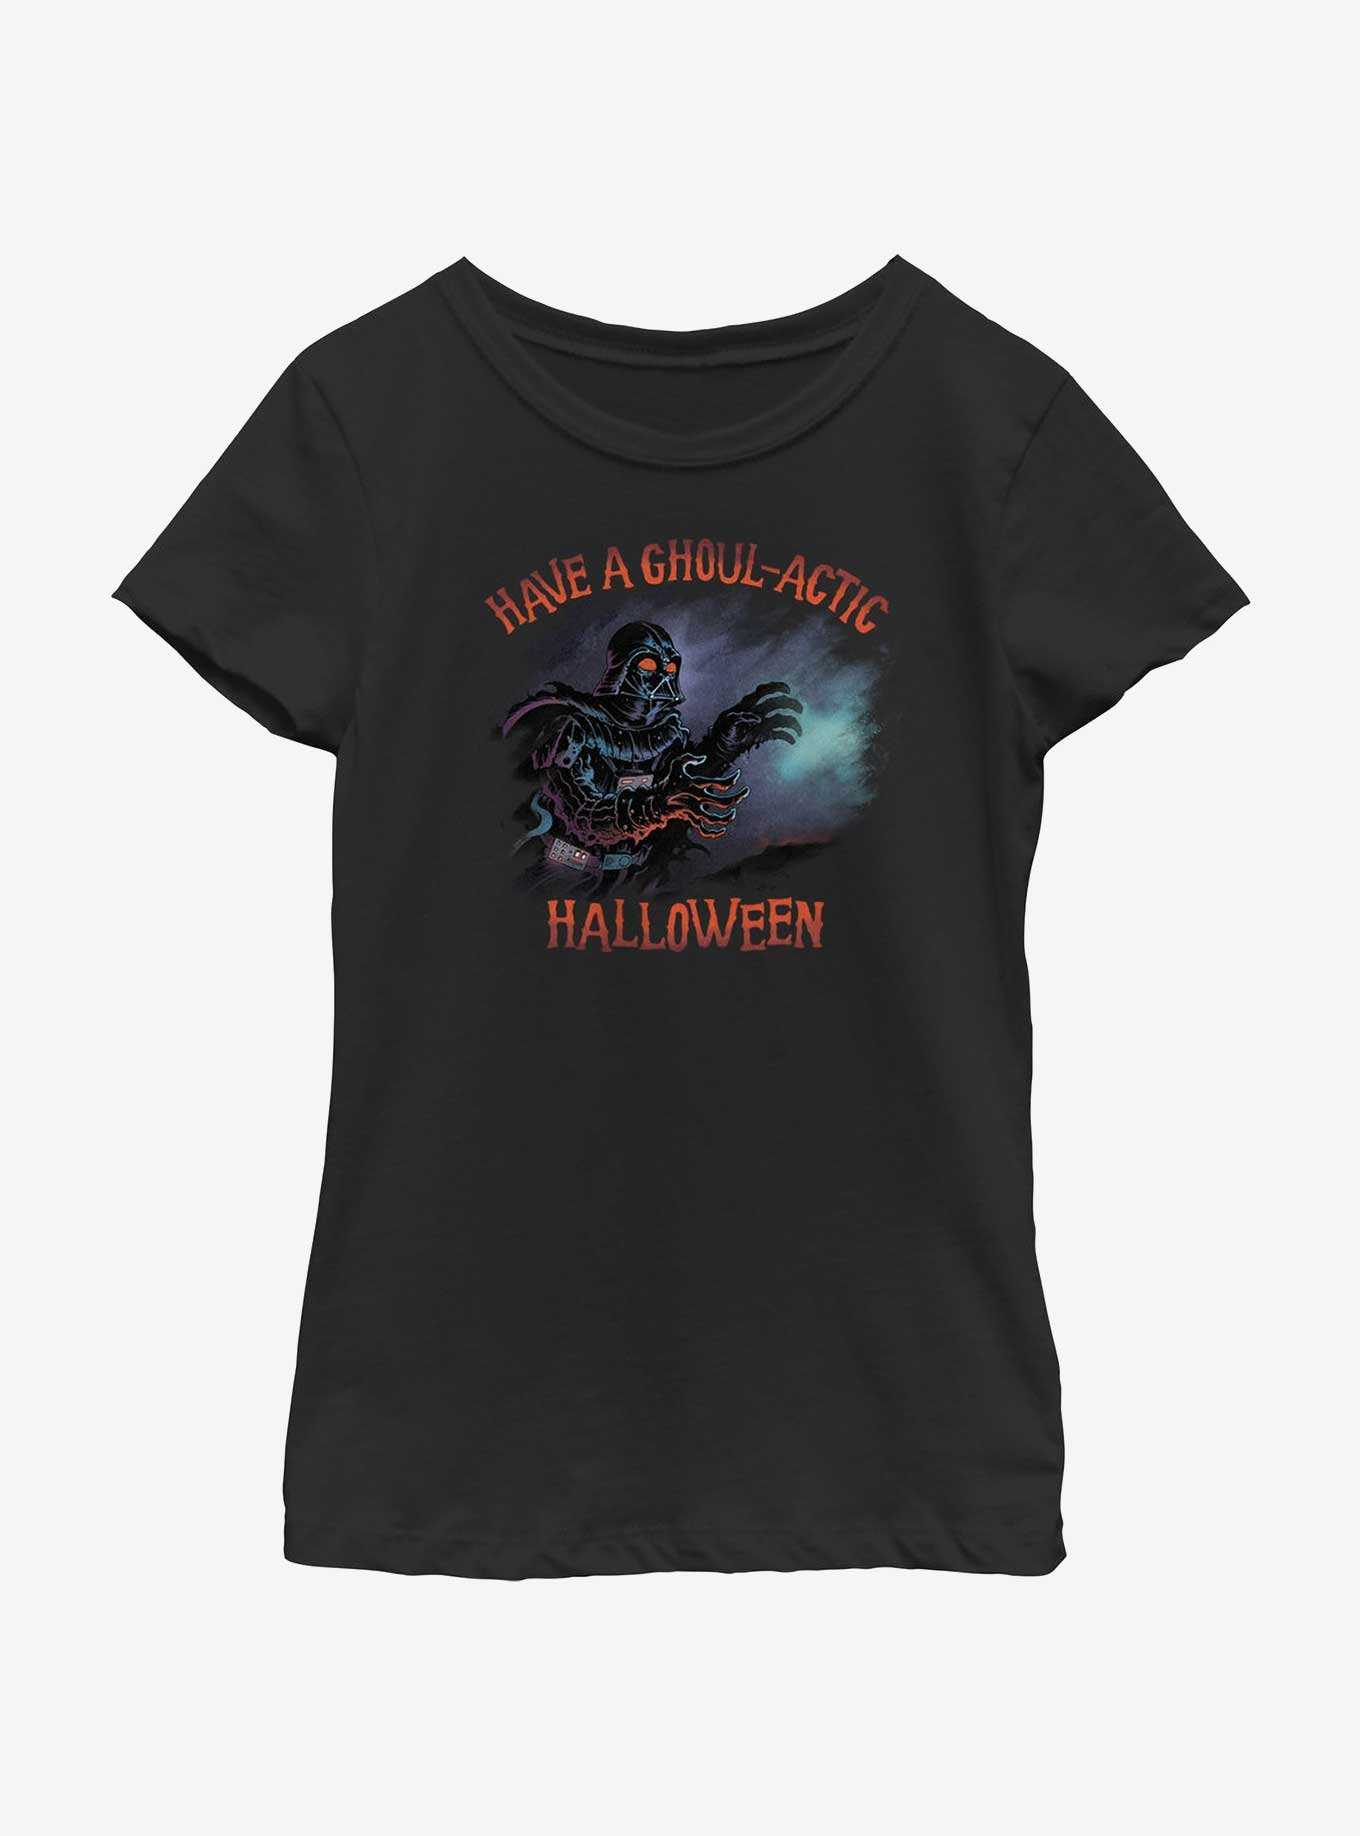 Star Wars Ghoulactic Halloween Youth Girls T-Shirt, , hi-res